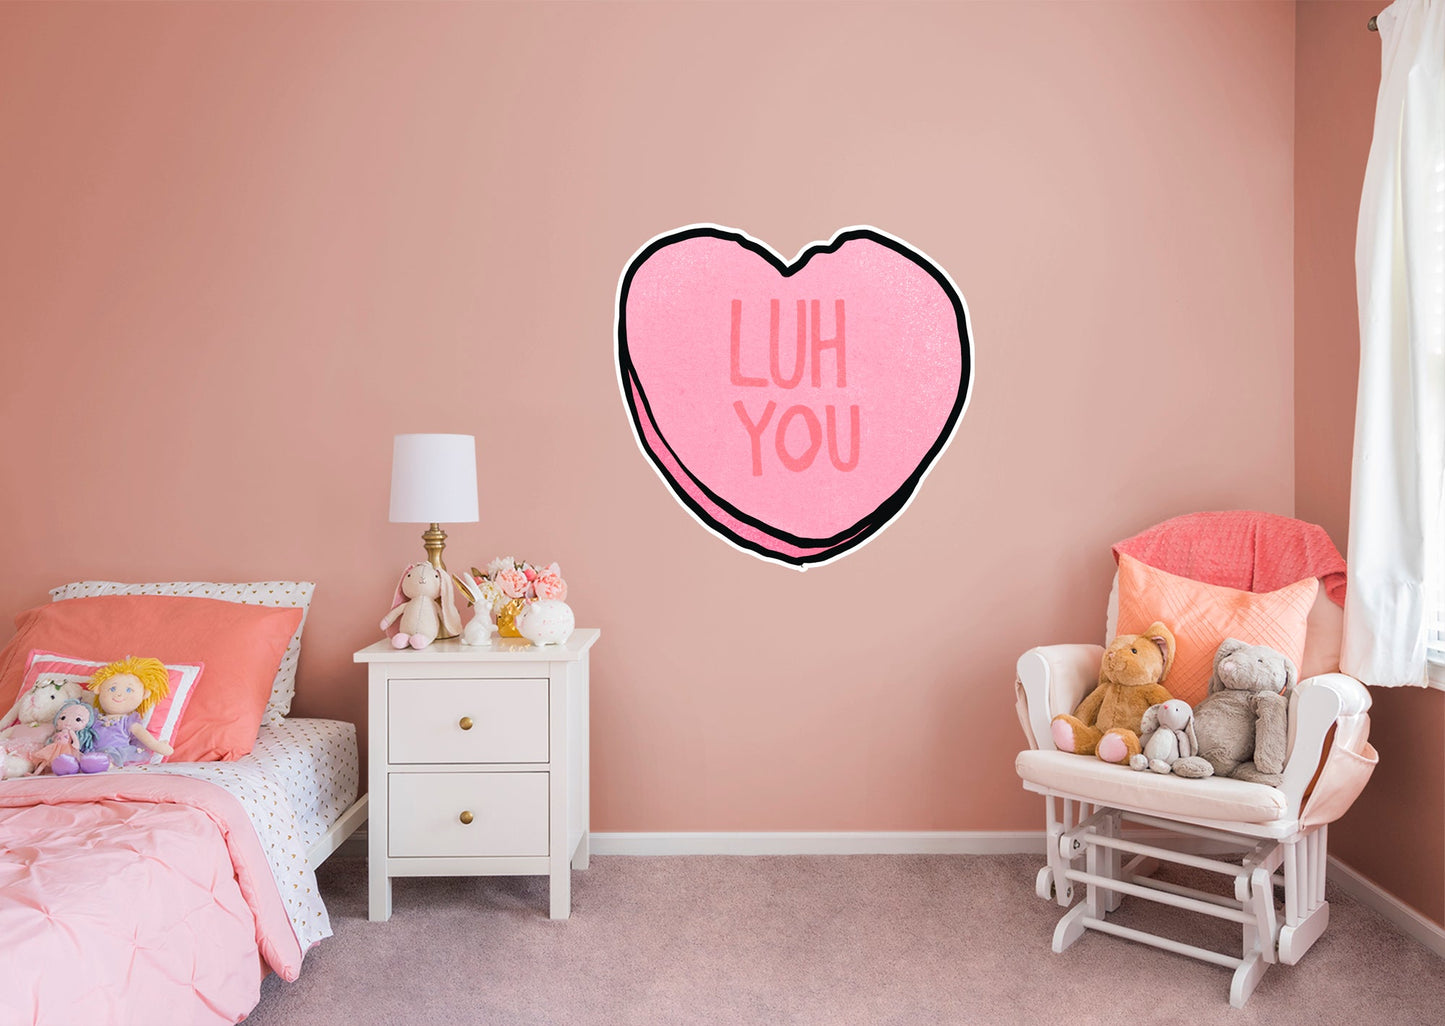 Luh You Heart        - Officially Licensed Big Moods Removable     Adhesive Decal